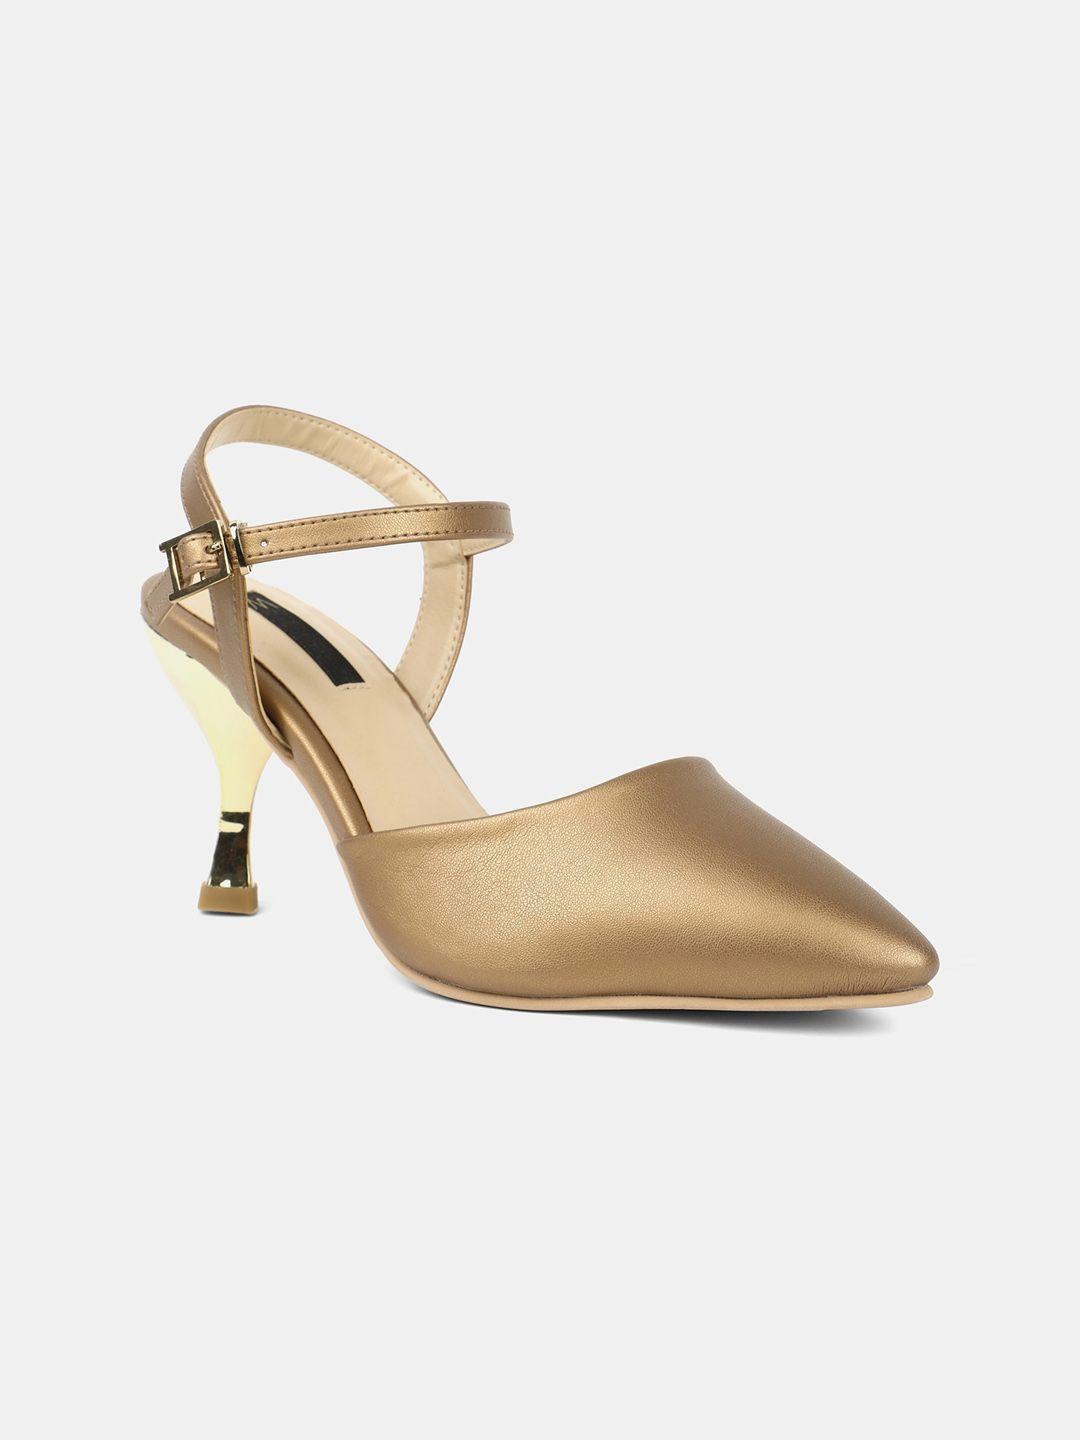 w gold-toned work kitten pumps with buckles